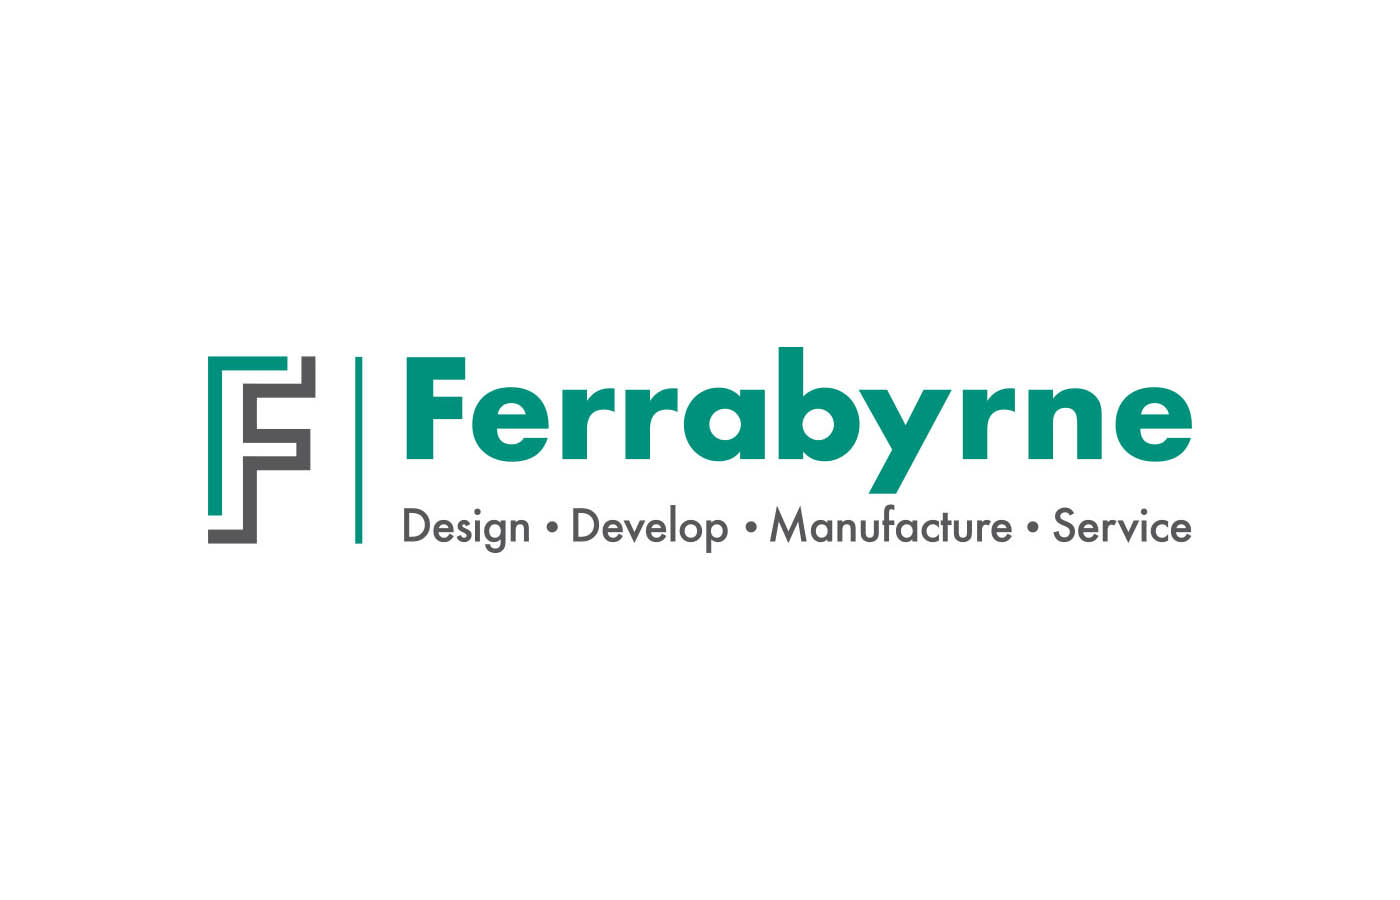 Ferrabyrne opens office in China